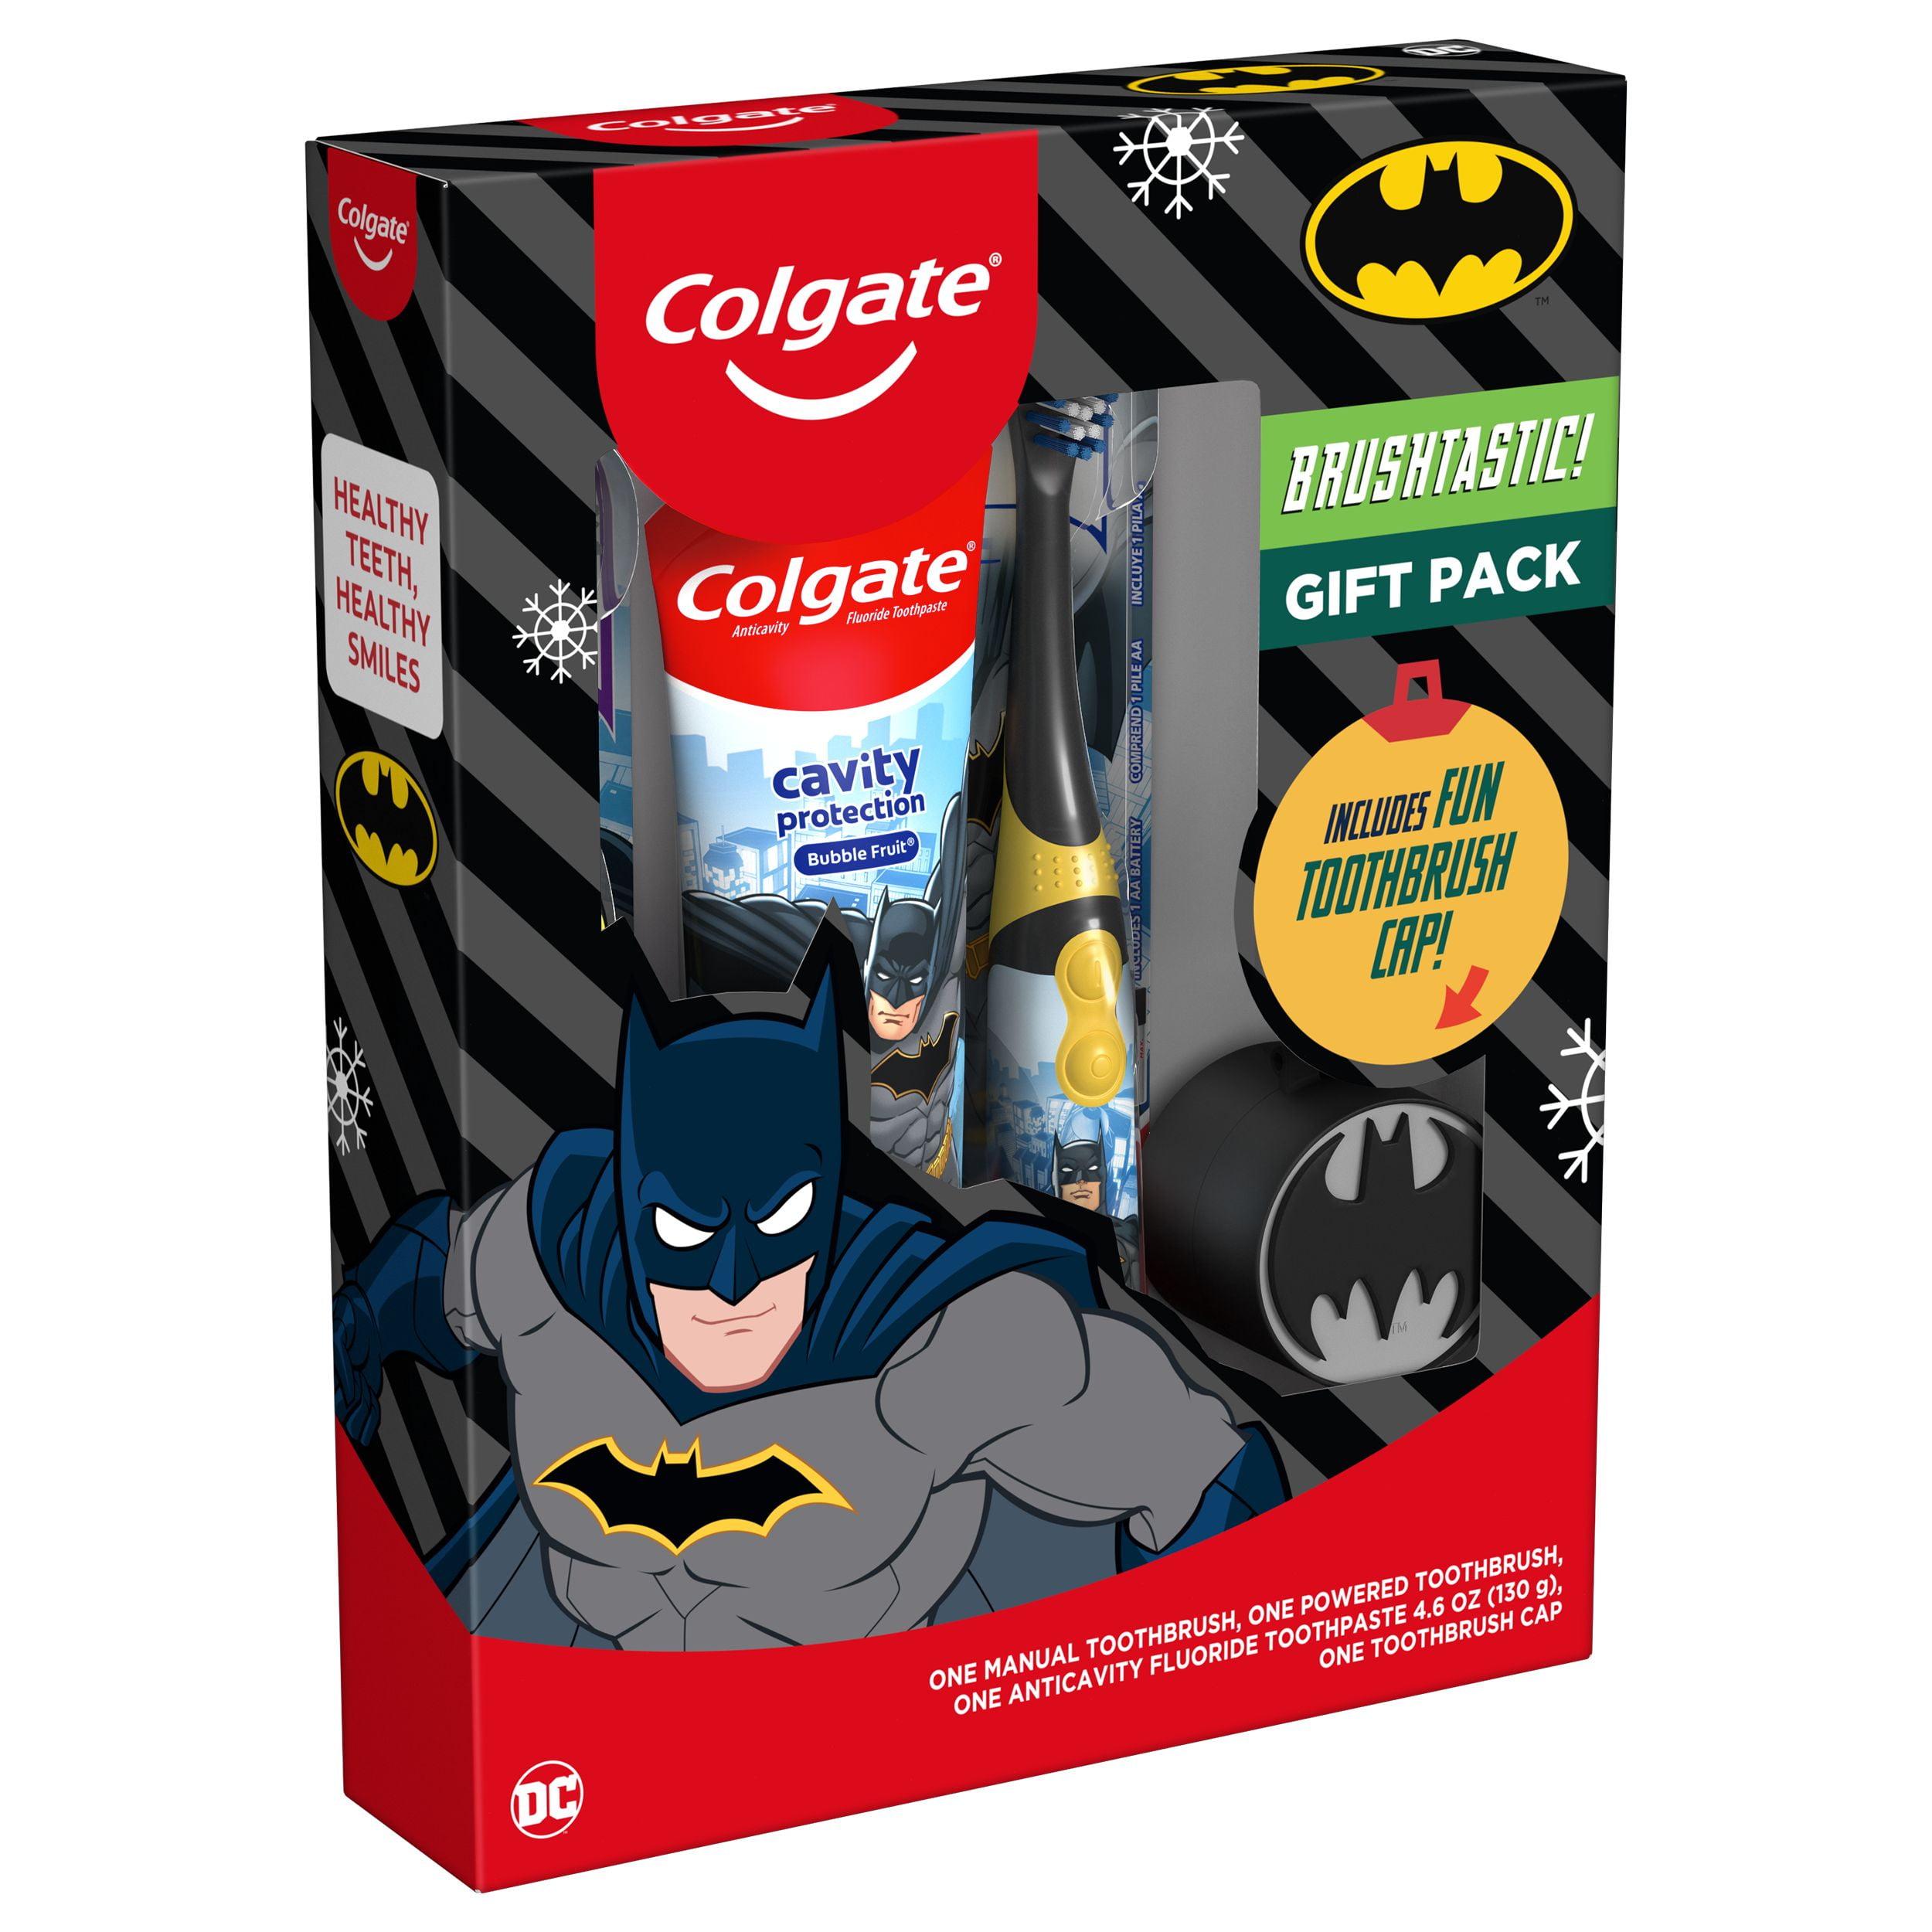 Colgate Kids Toothbrush Set with Toothpaste, Batman Gift Pack 